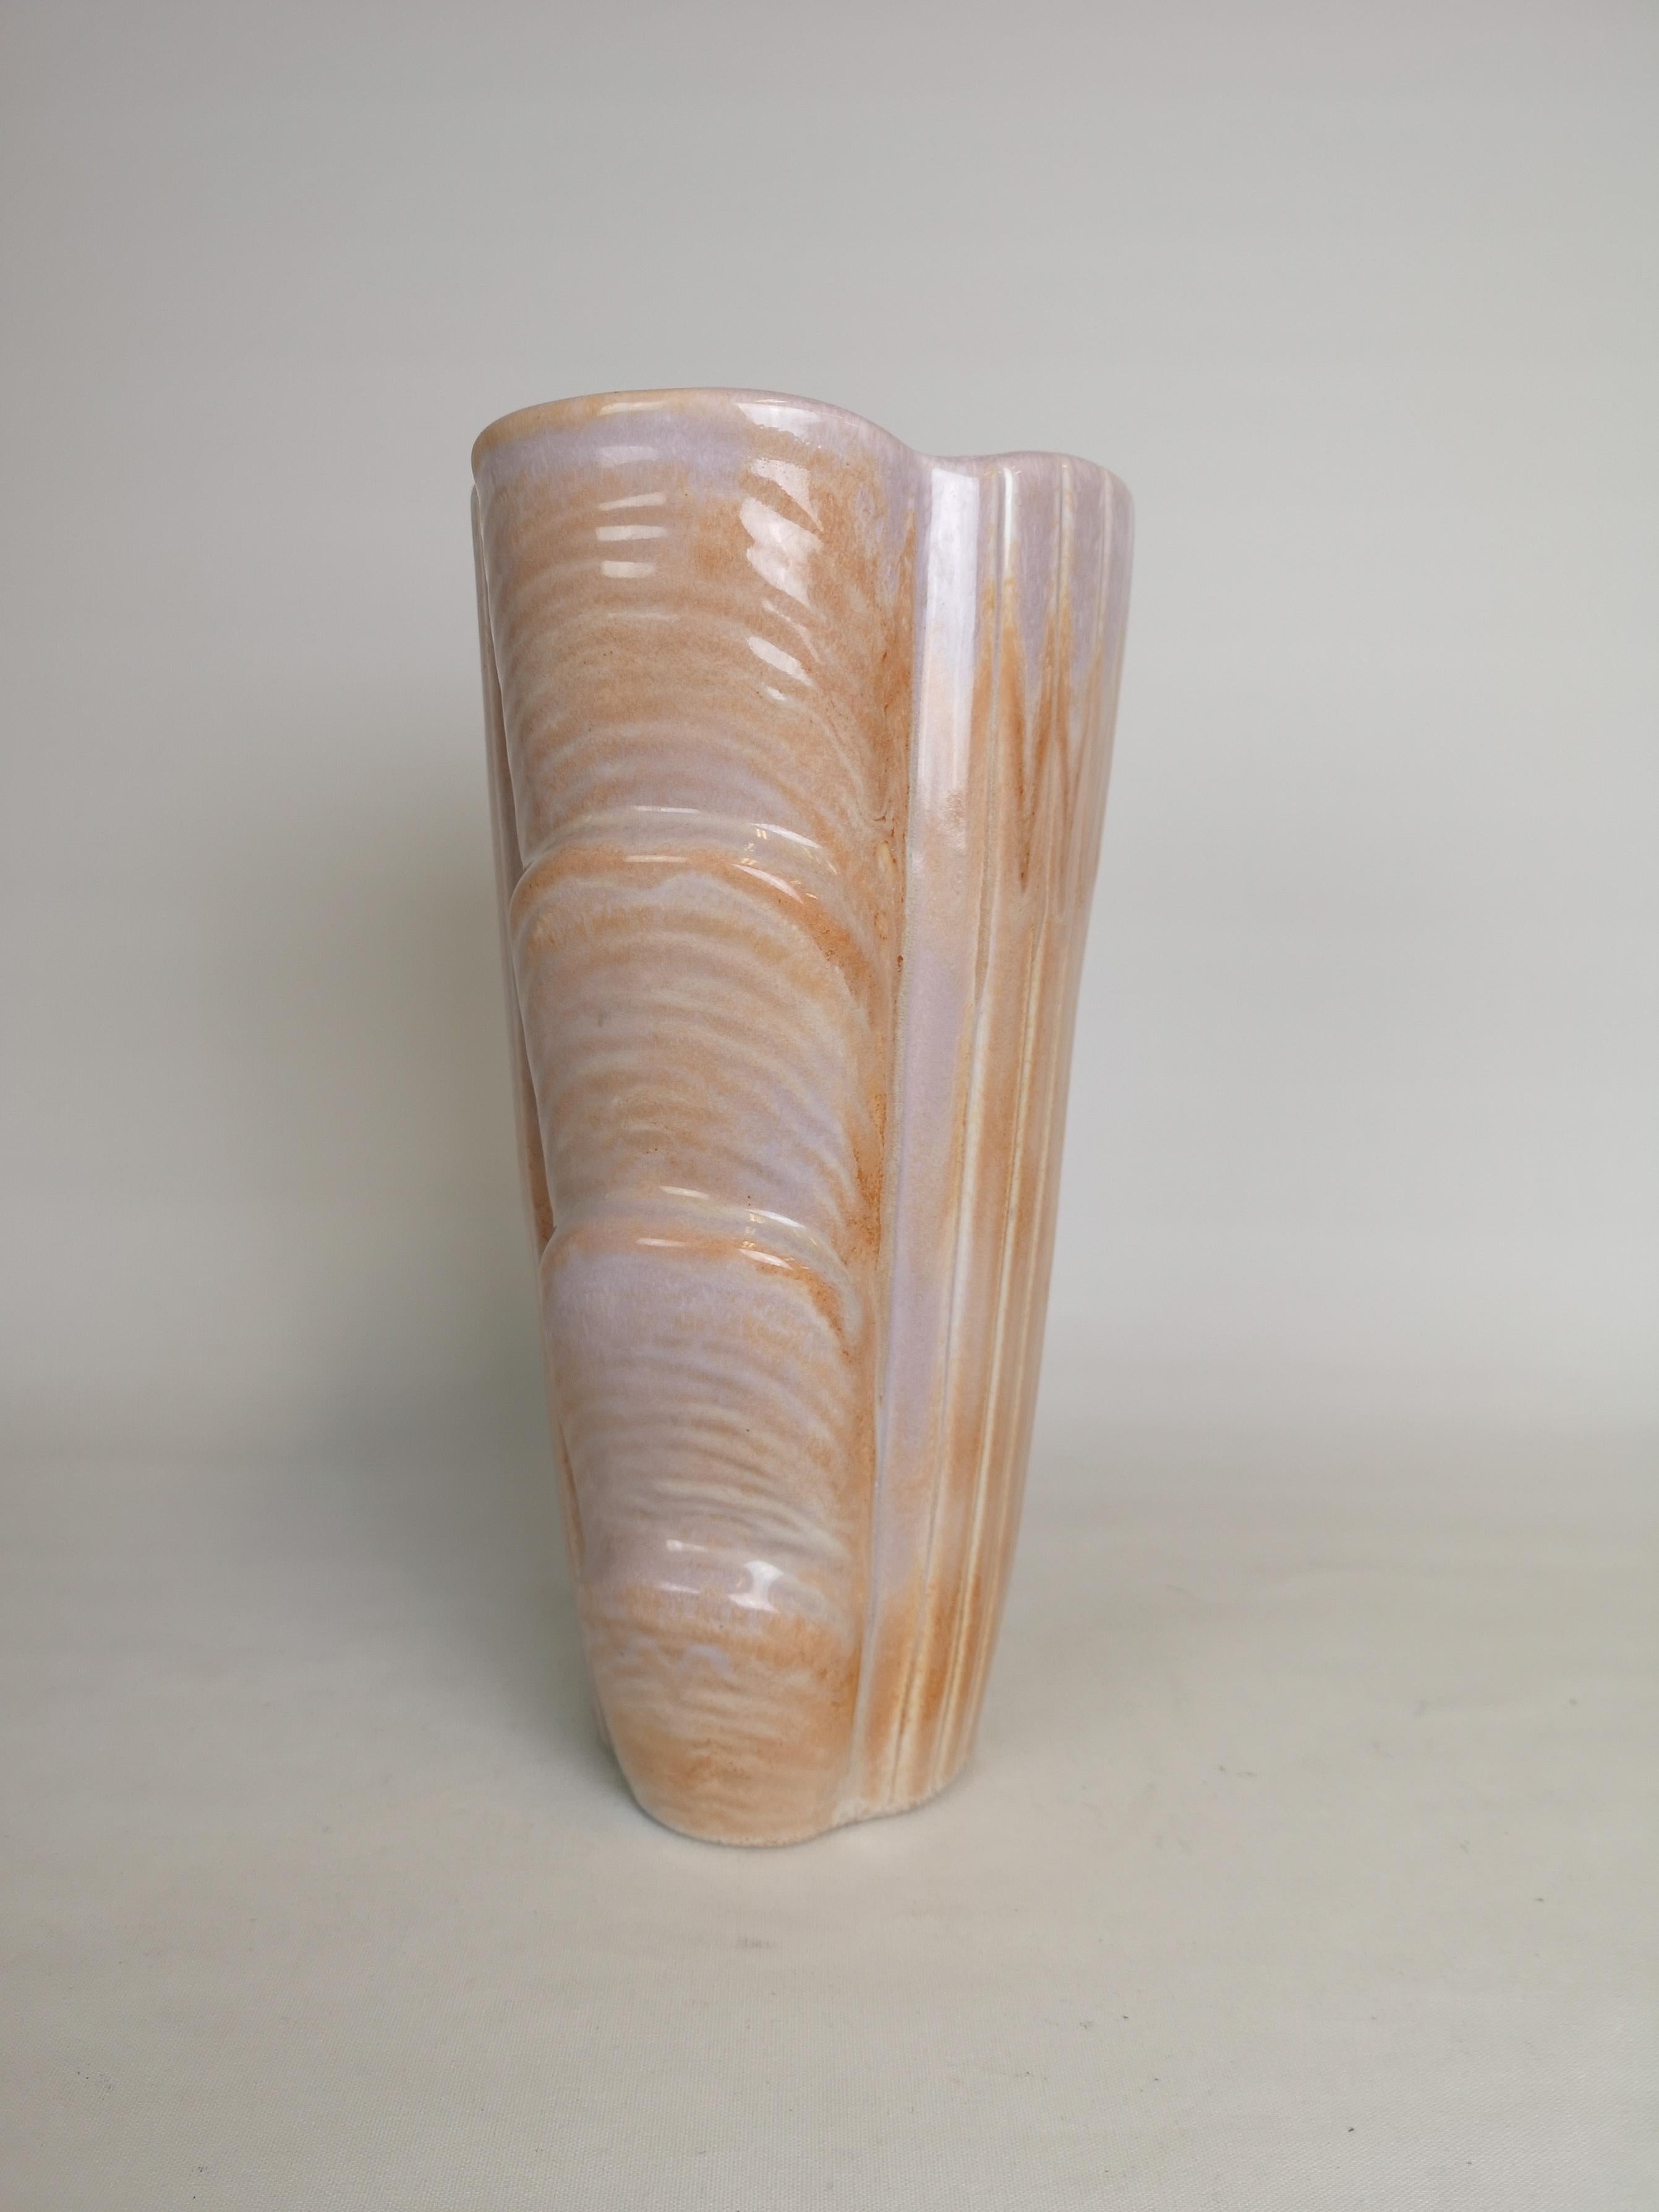 Exceptional quality over this vase produced in Sweden at Rörstrand factory and designed by Gunnar Nylund. It was made in 1950s and has a nice shimmer glaze with fine lines.

Very good condition.

Measures: H 30 cm, W 18 cm, D 14 cm.
    